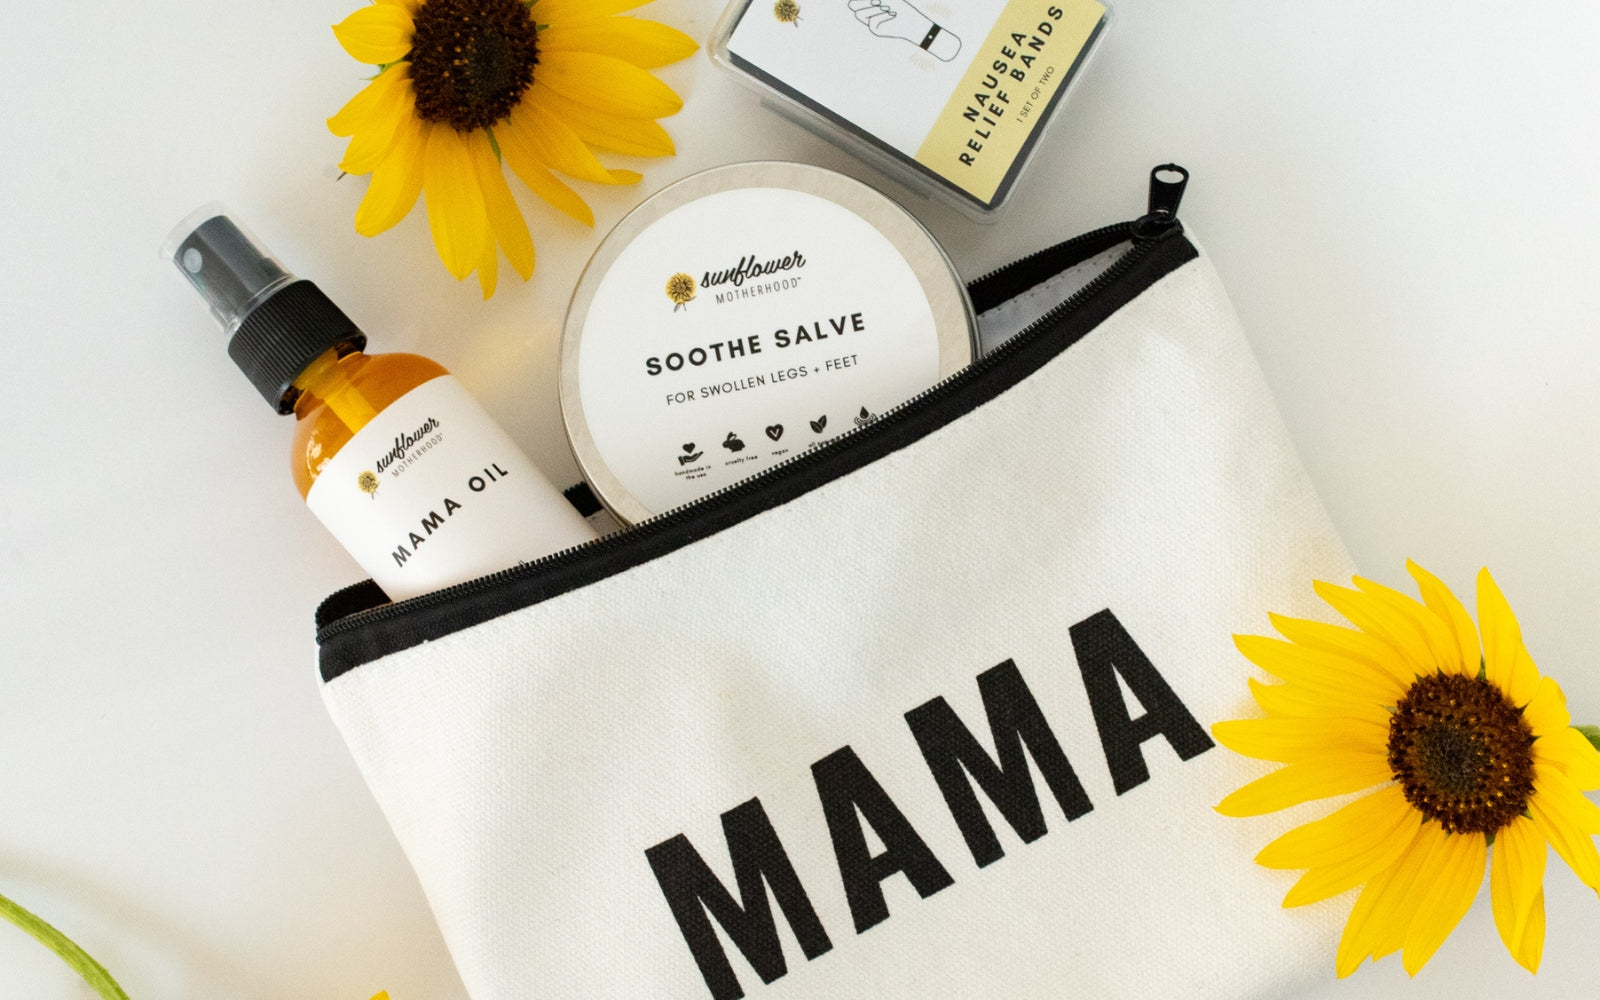 A gift set for mothers, containing various items.